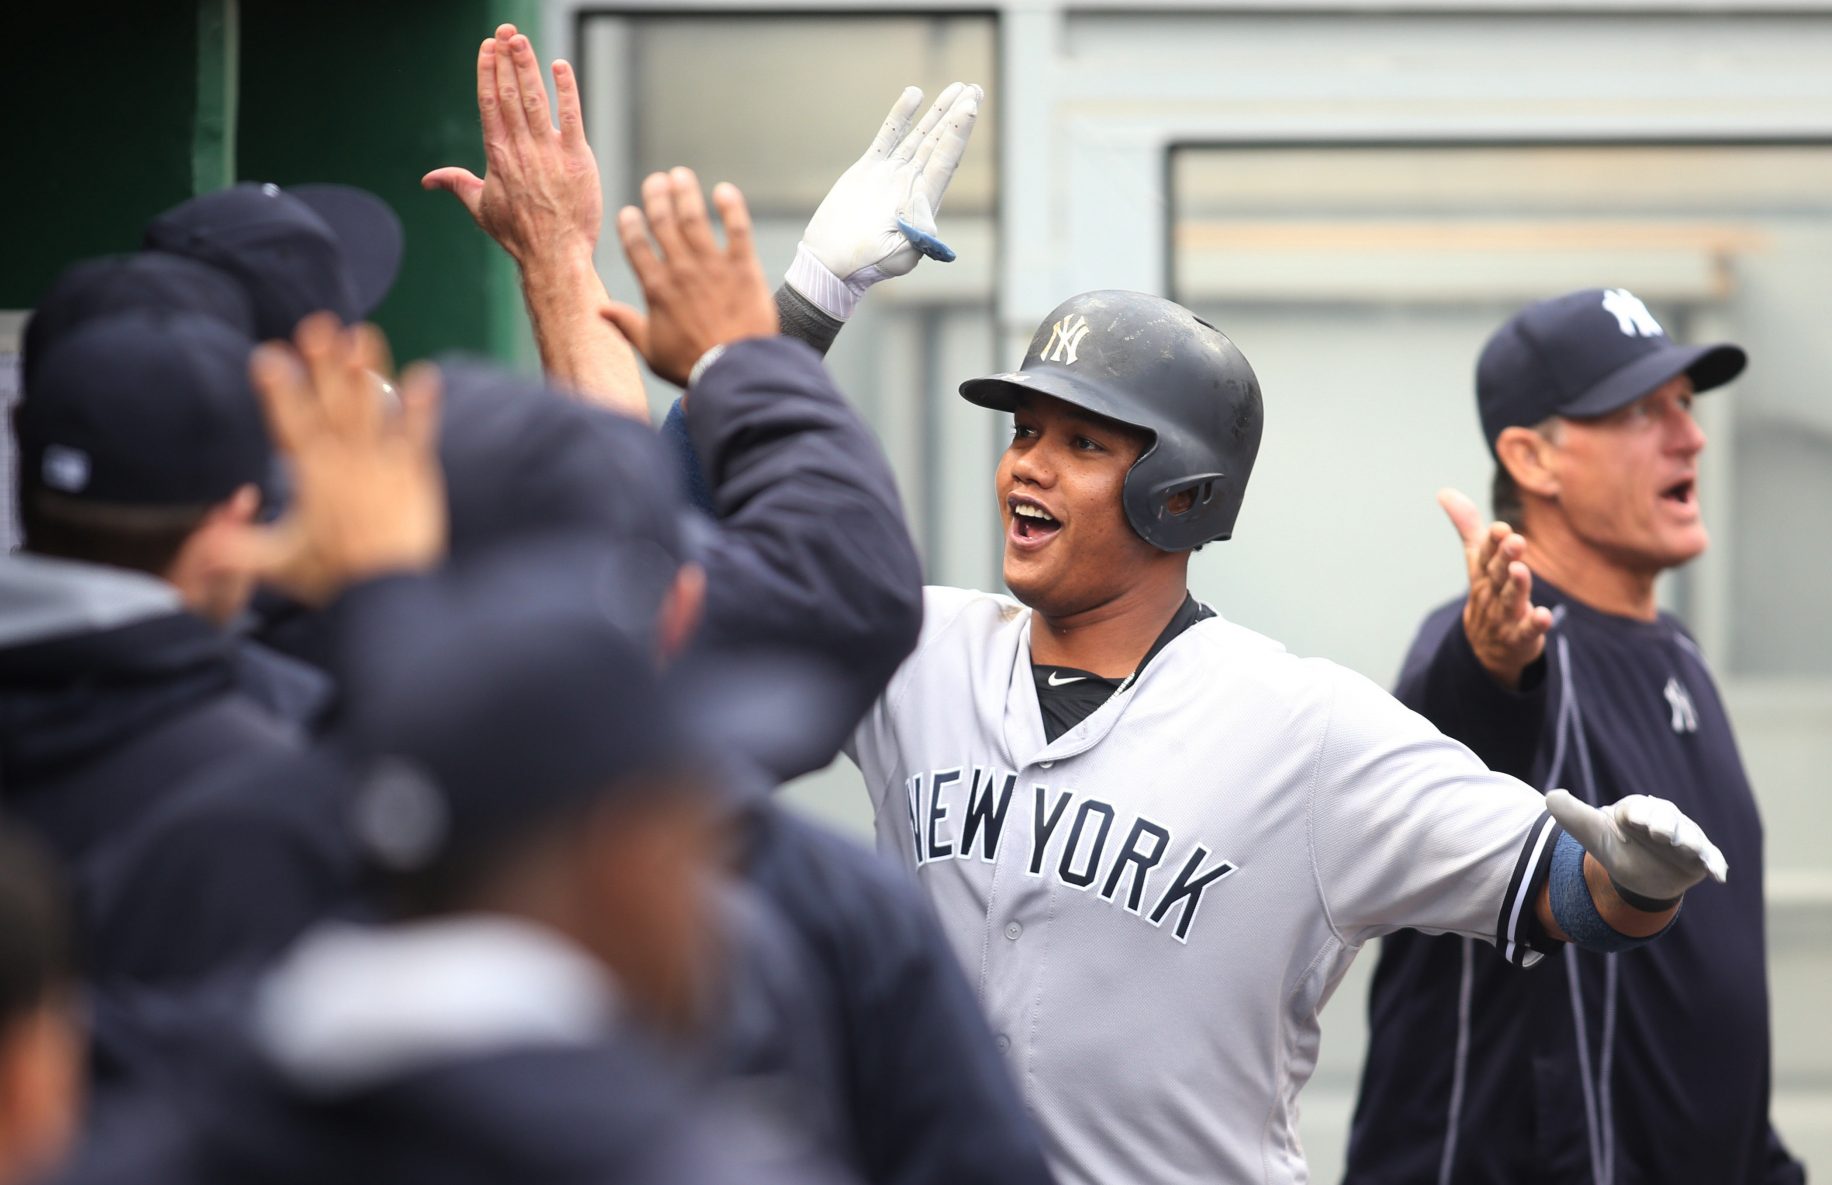 New York Yankees: Who's Hot, Who's Not Heading Into Boston Series? 3